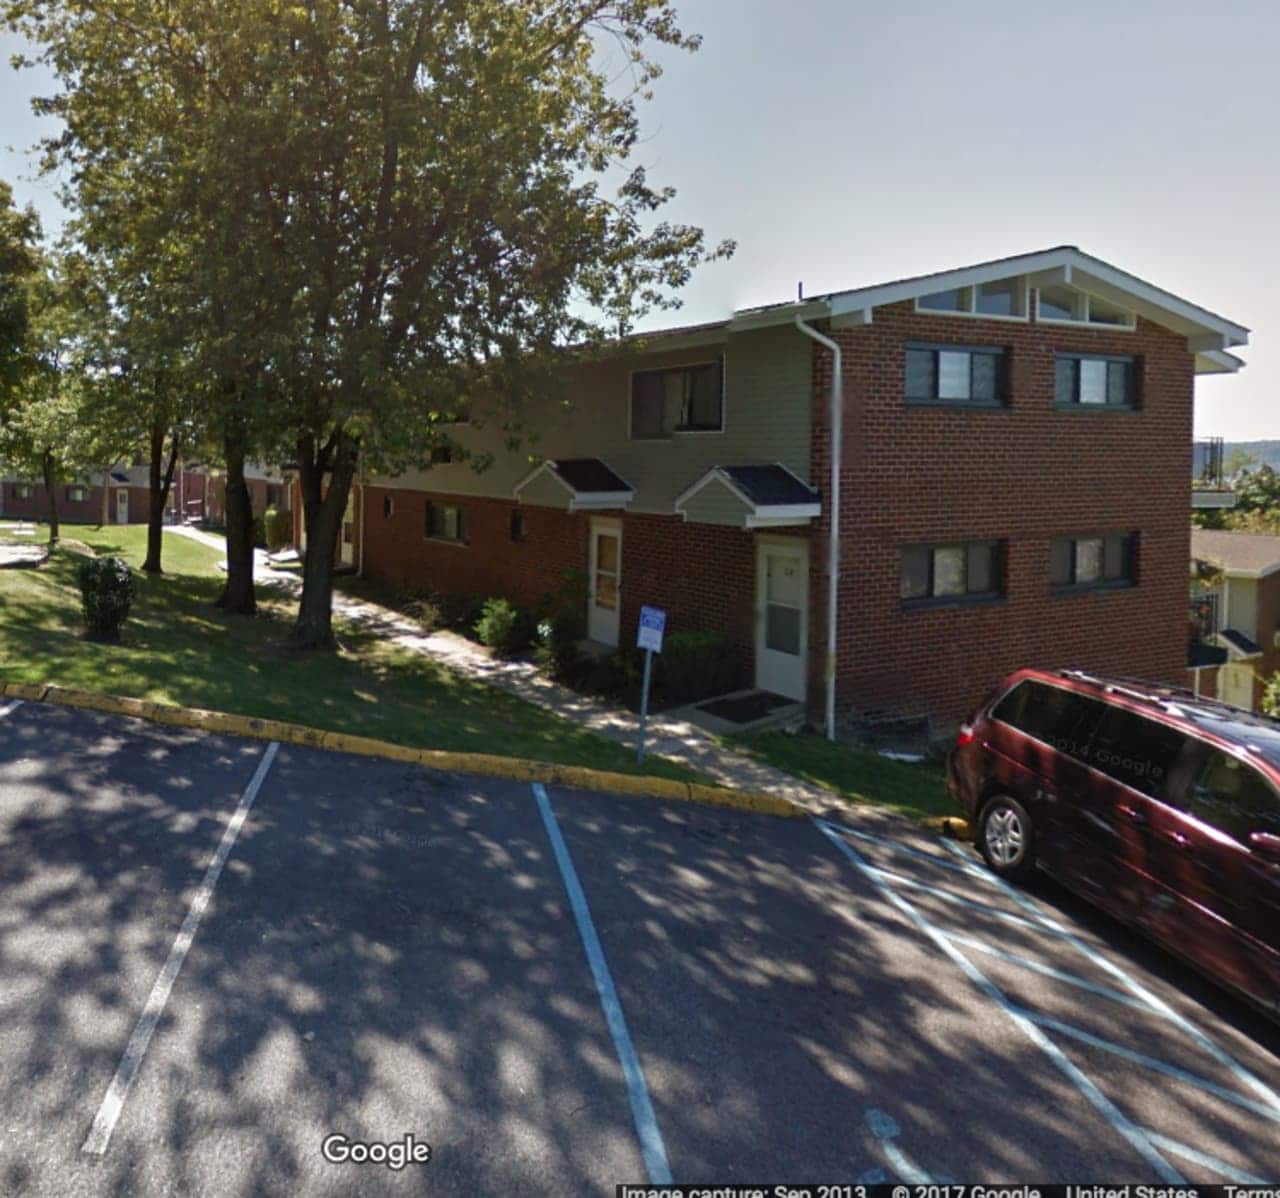 A 58-year-old Ossining woman died inside an apartment at 42 Cedar Lane in Ossining following an early morning fire.